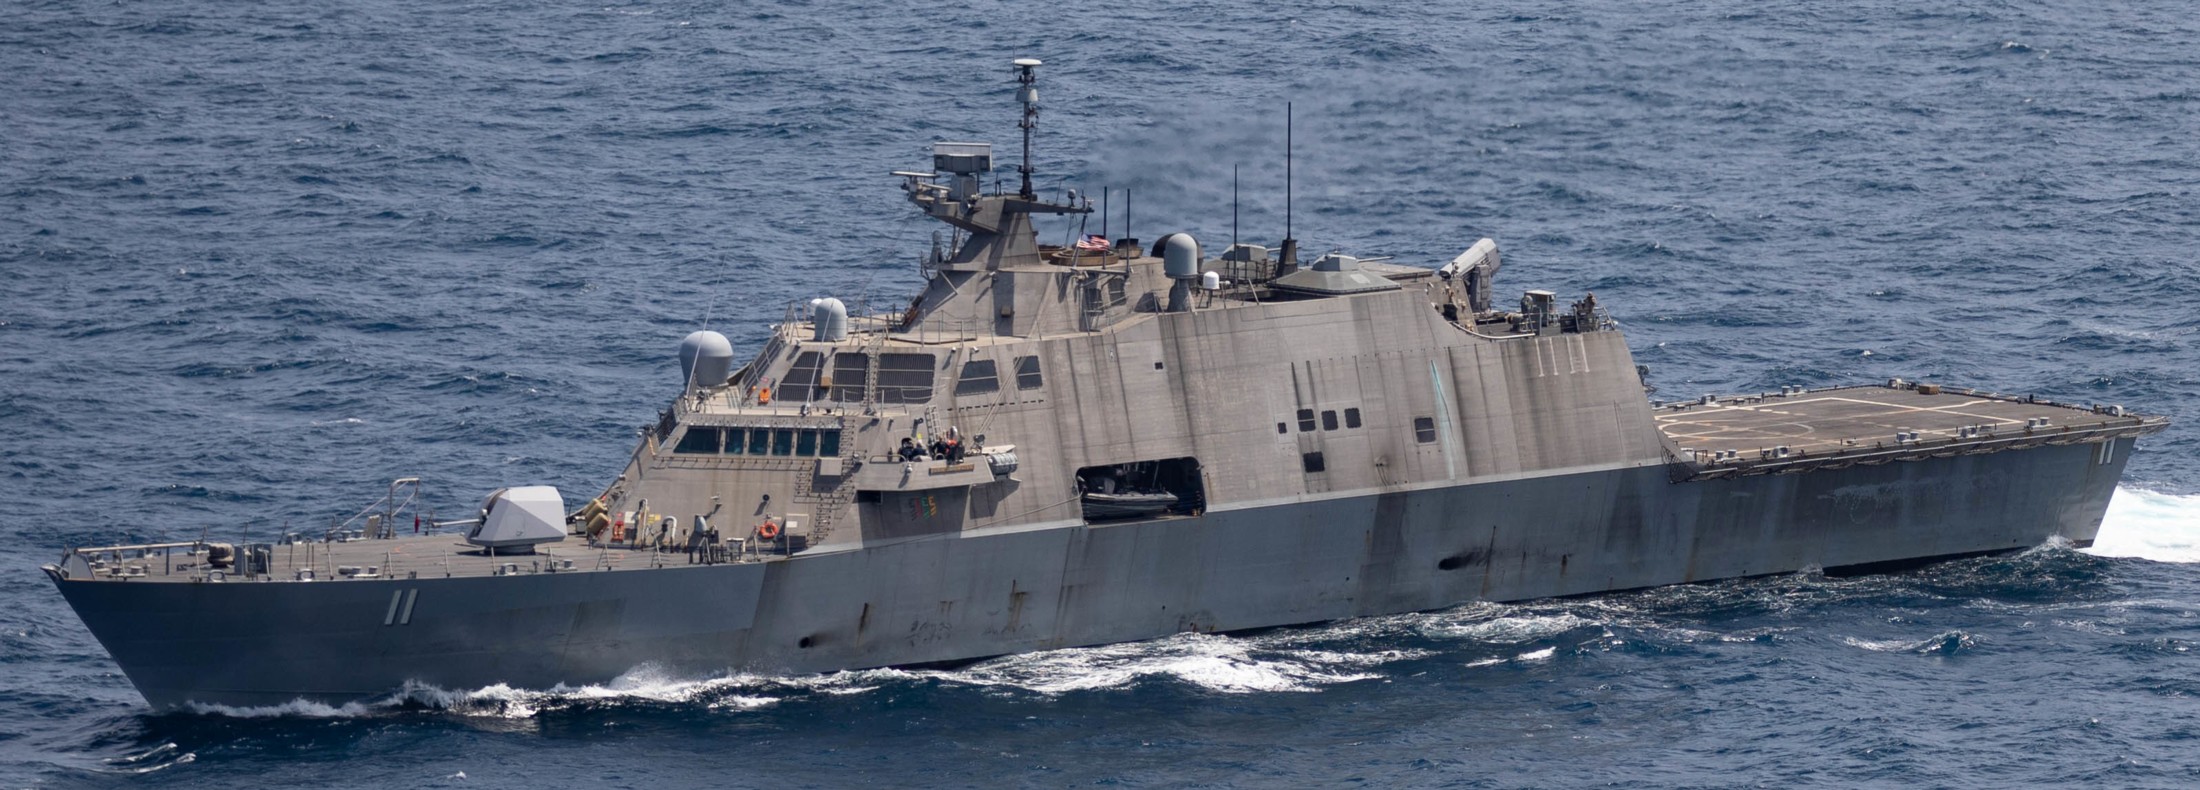 lcs-11 uss sioux city freedom class littoral combat ship us navy martinique caribbean sea 75